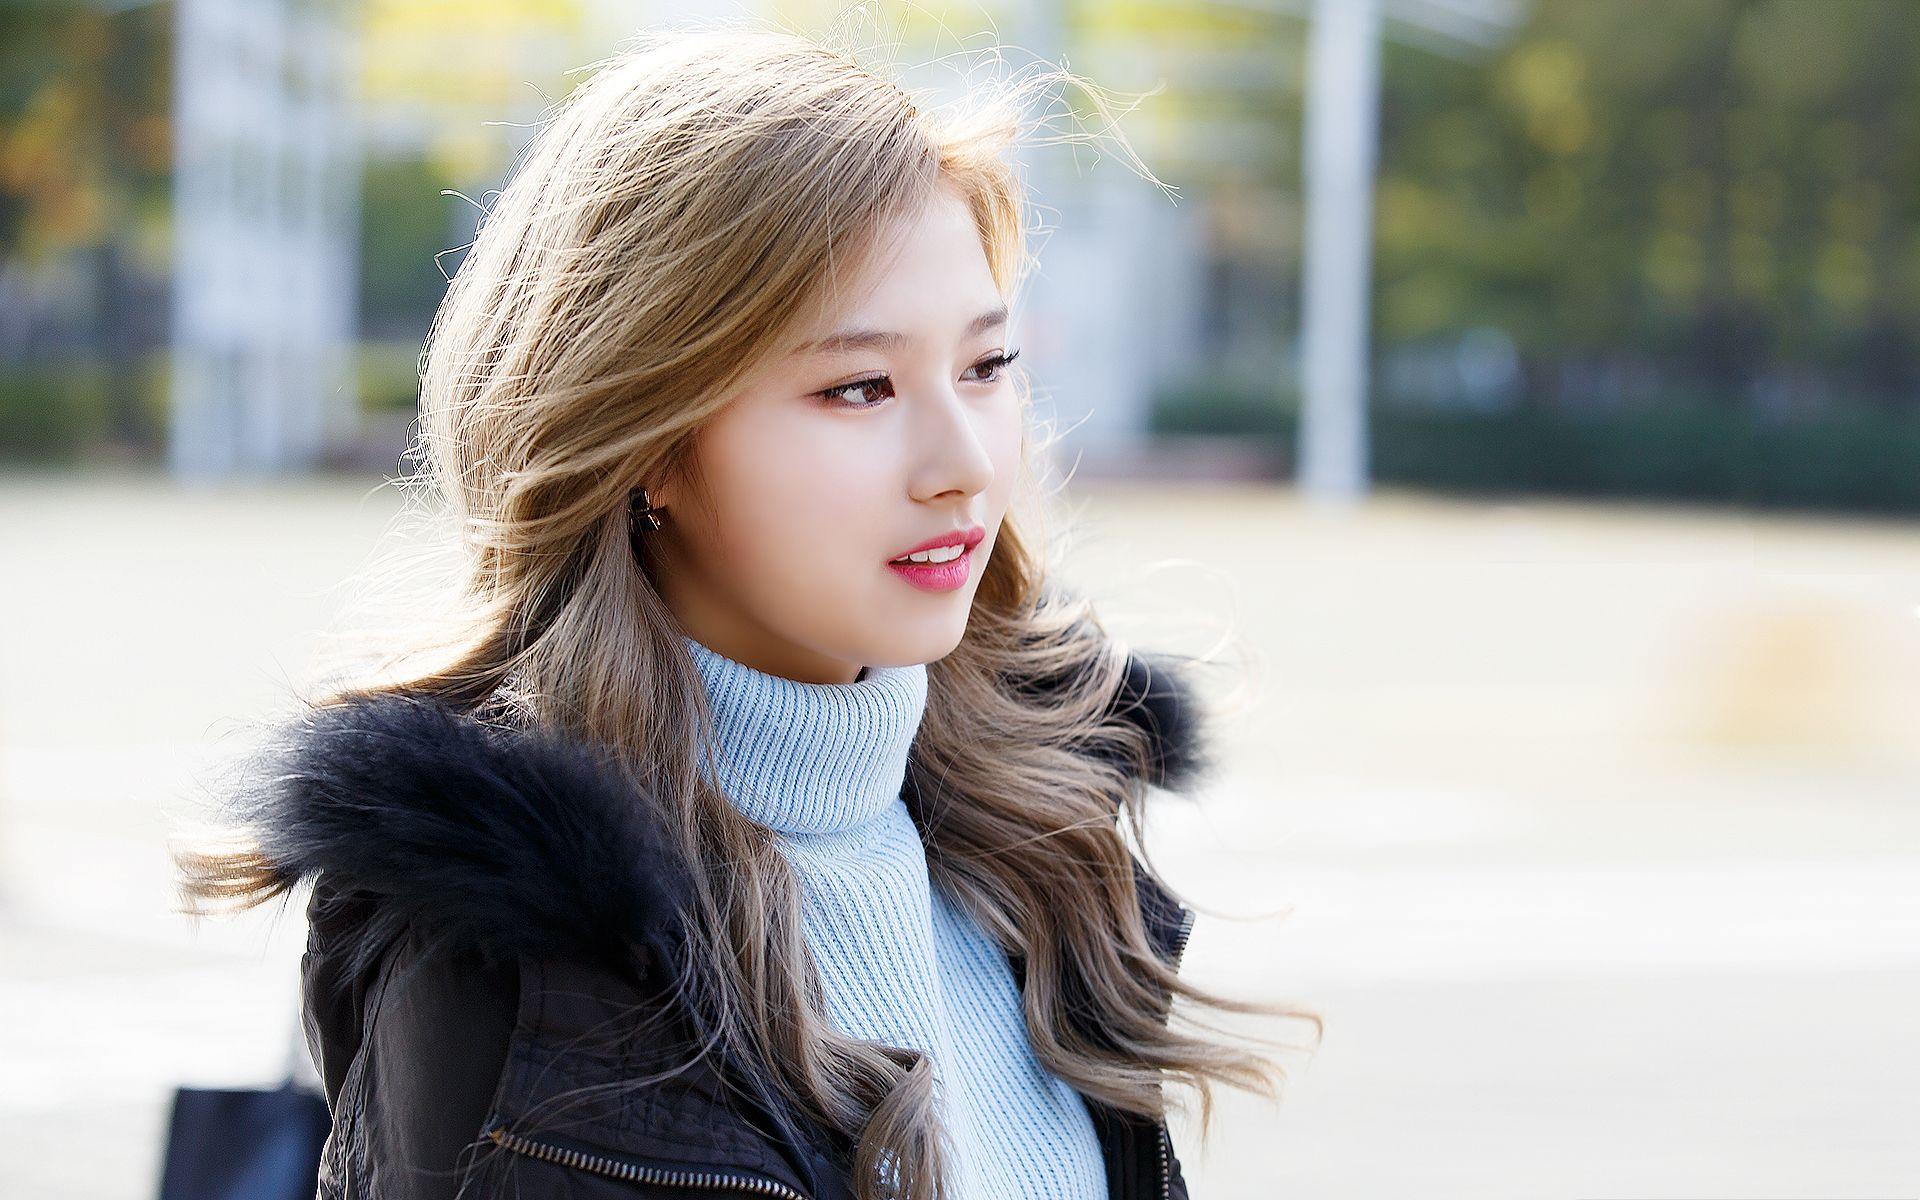 Twice (JYP Ent) image Sana's Wallpaper HD wallpaper and background